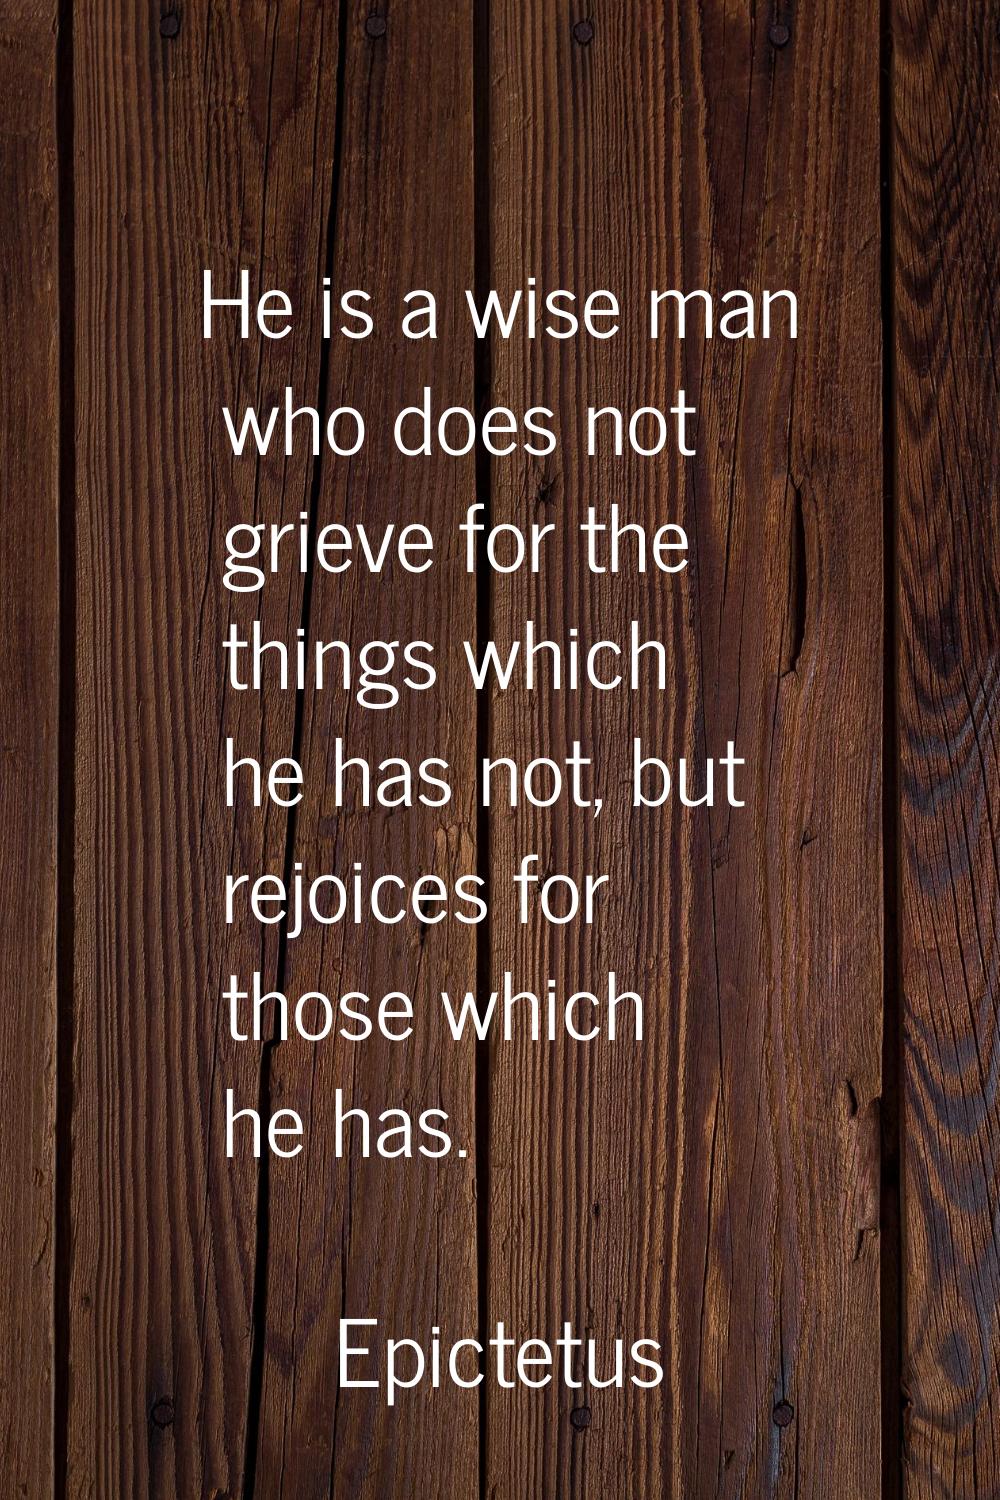 He is a wise man who does not grieve for the things which he has not, but rejoices for those which 